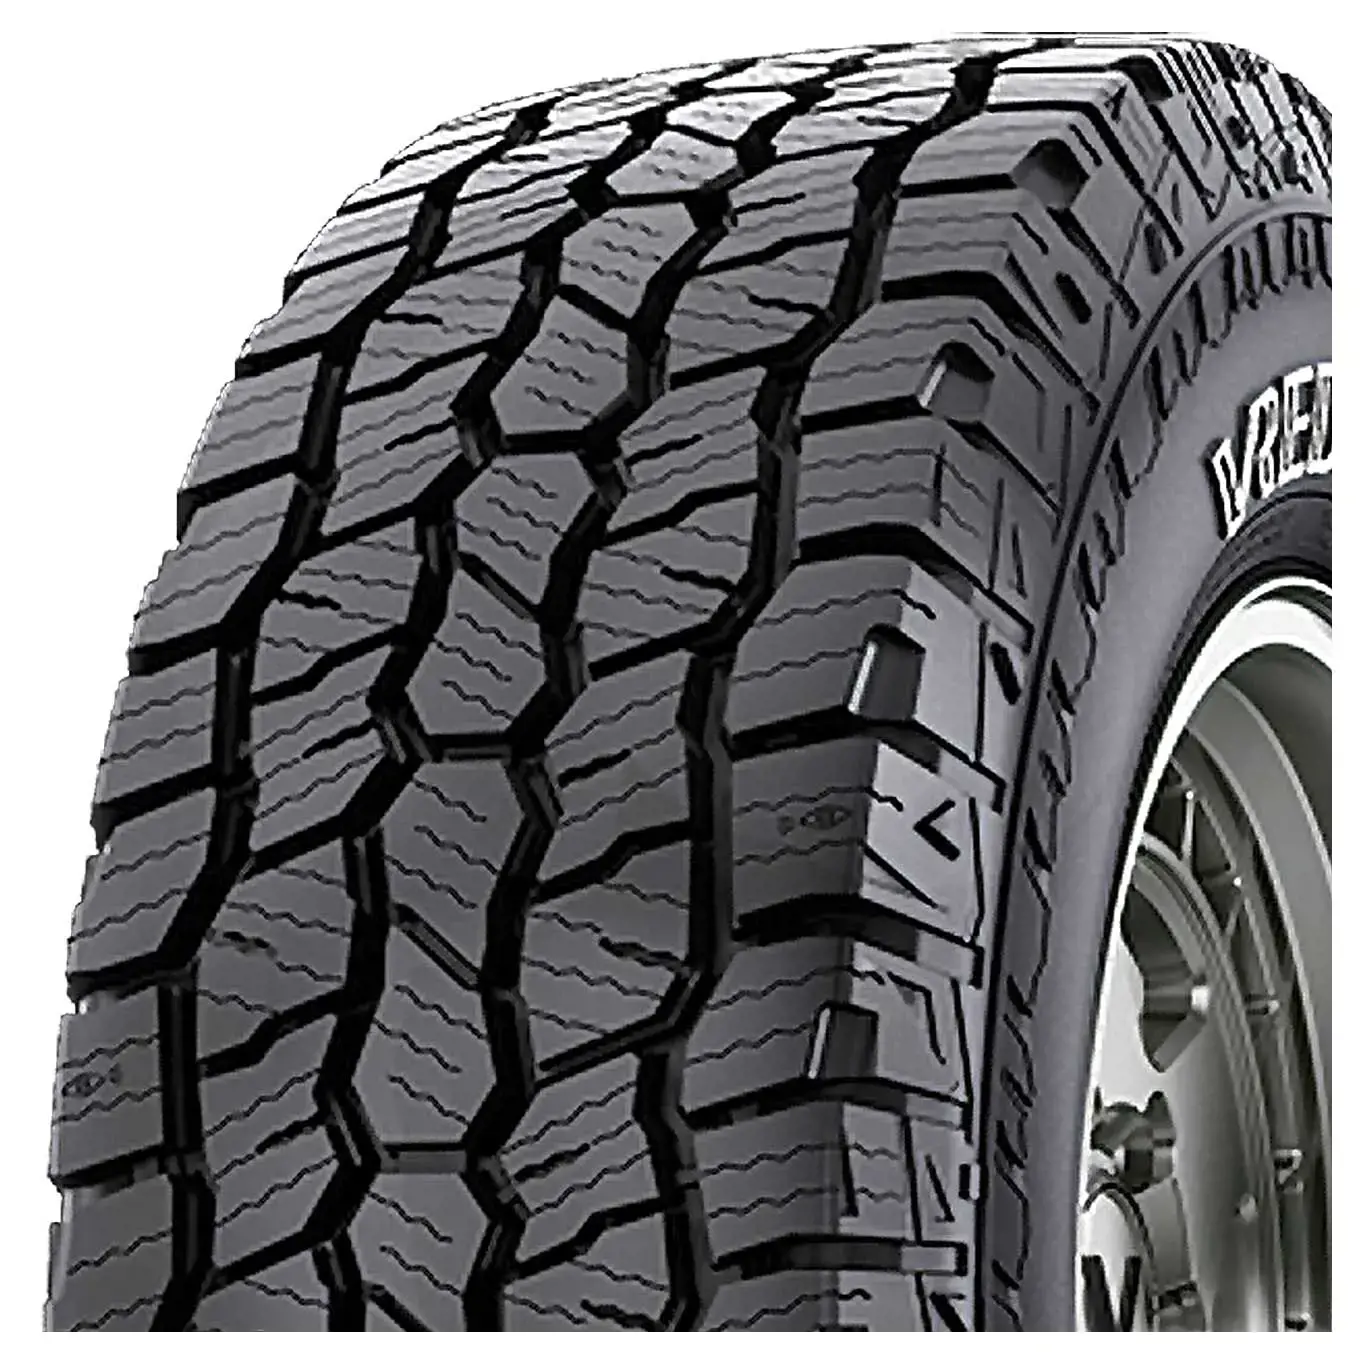 LT245/70 R17 119S/116S PINZA AT BSW